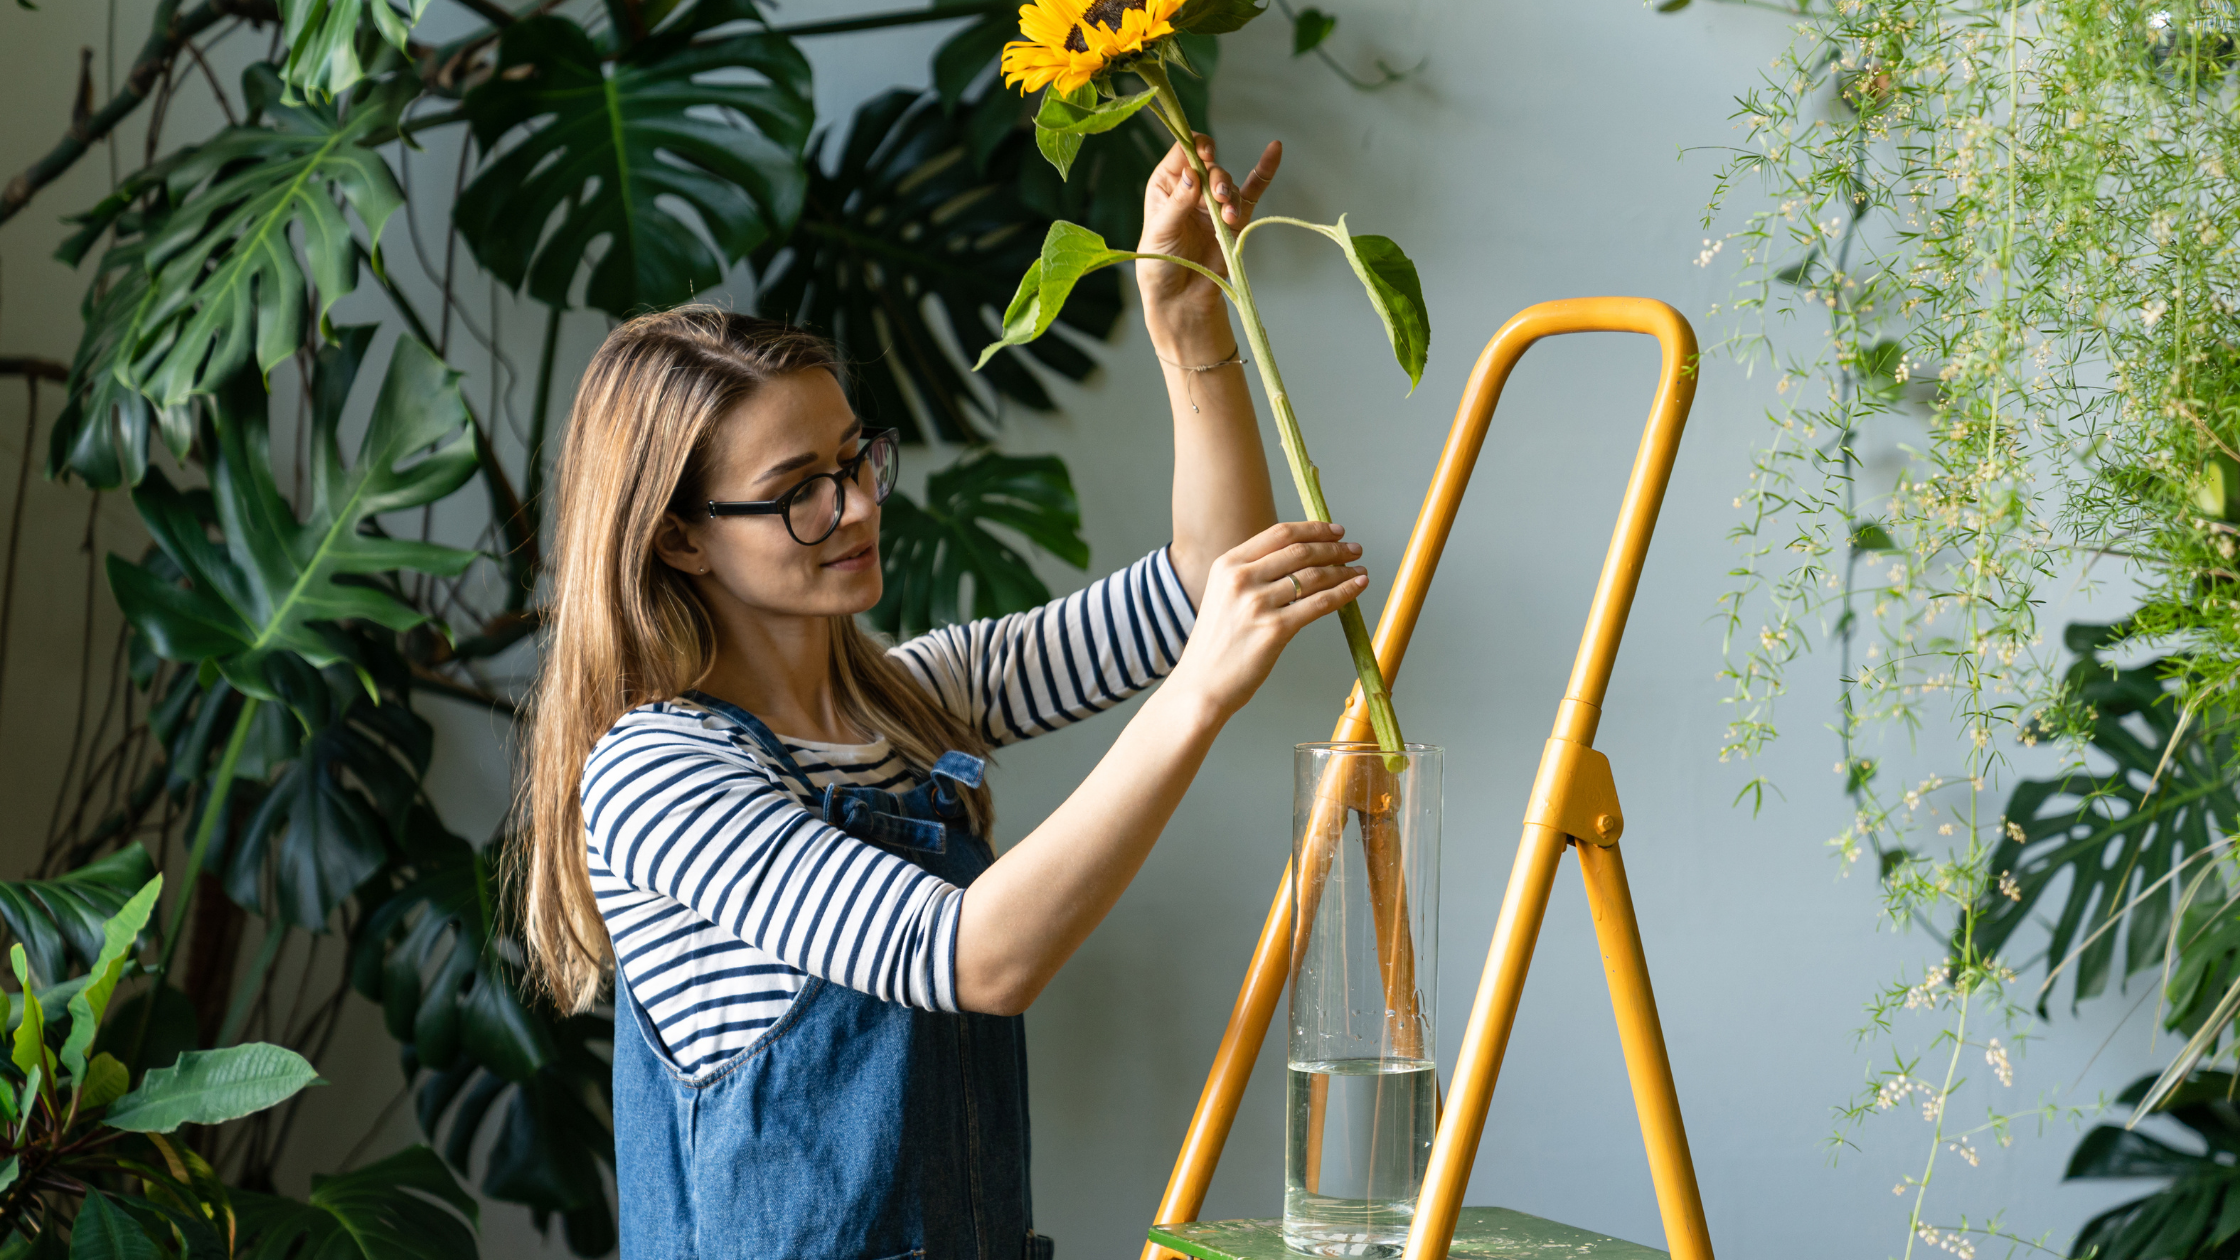 image of a florist with a ladder placing a flower in a vase